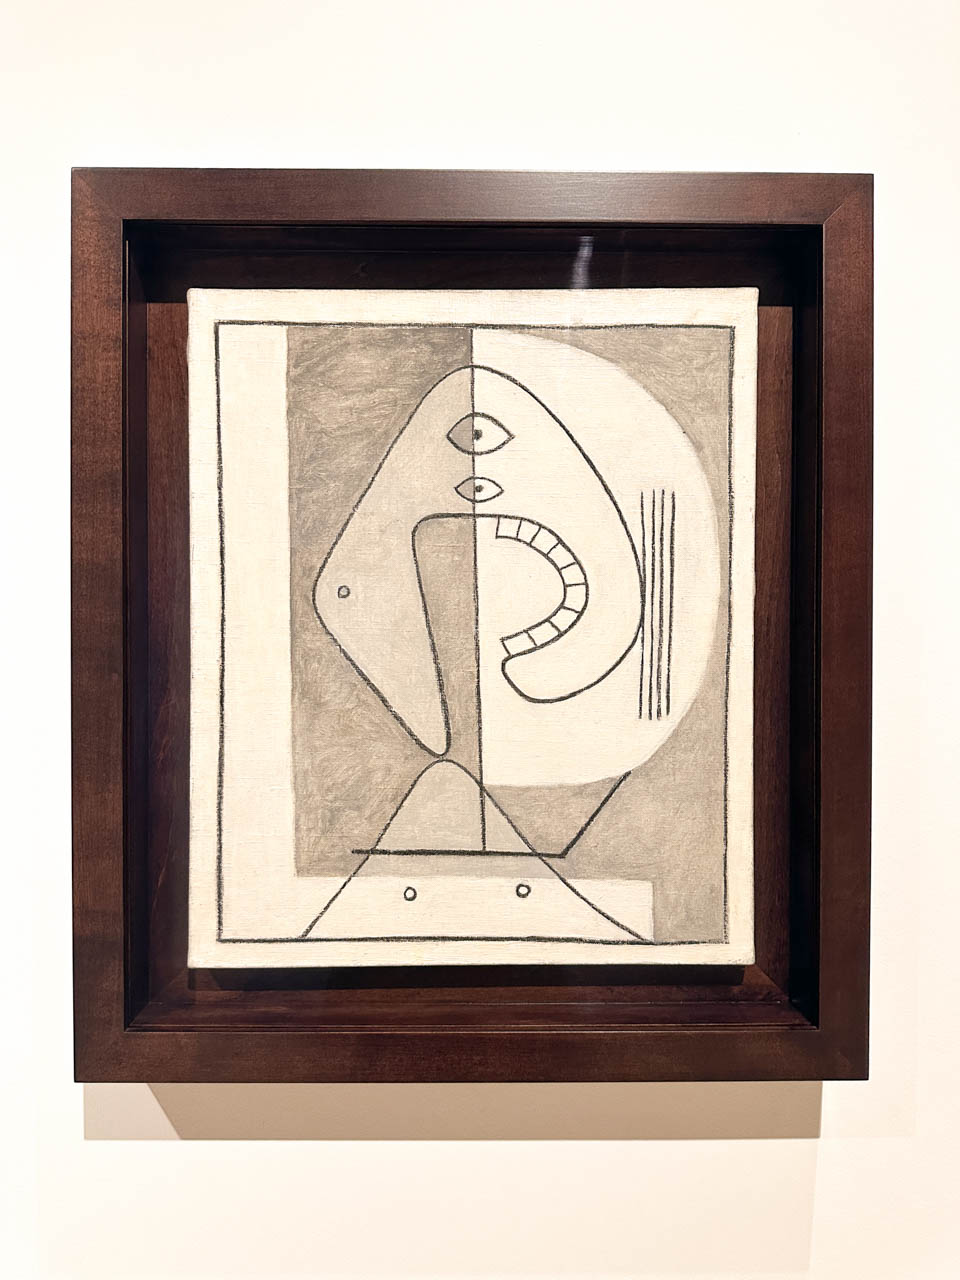 Visage sur fond bicolore by Pablo Picasso displayed at the Picasso Museum in Malaga